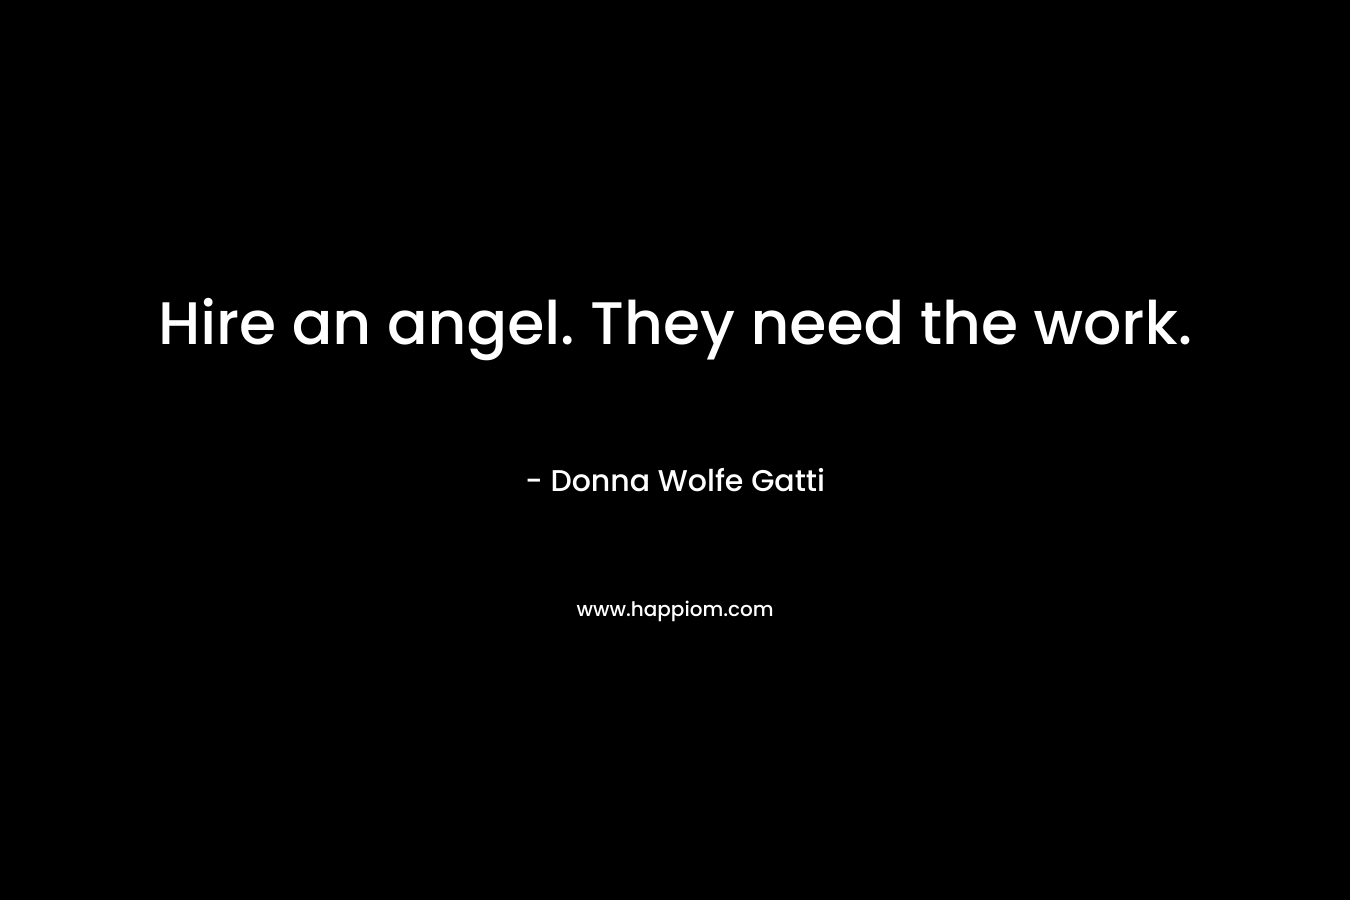 Hire an angel. They need the work. – Donna Wolfe Gatti